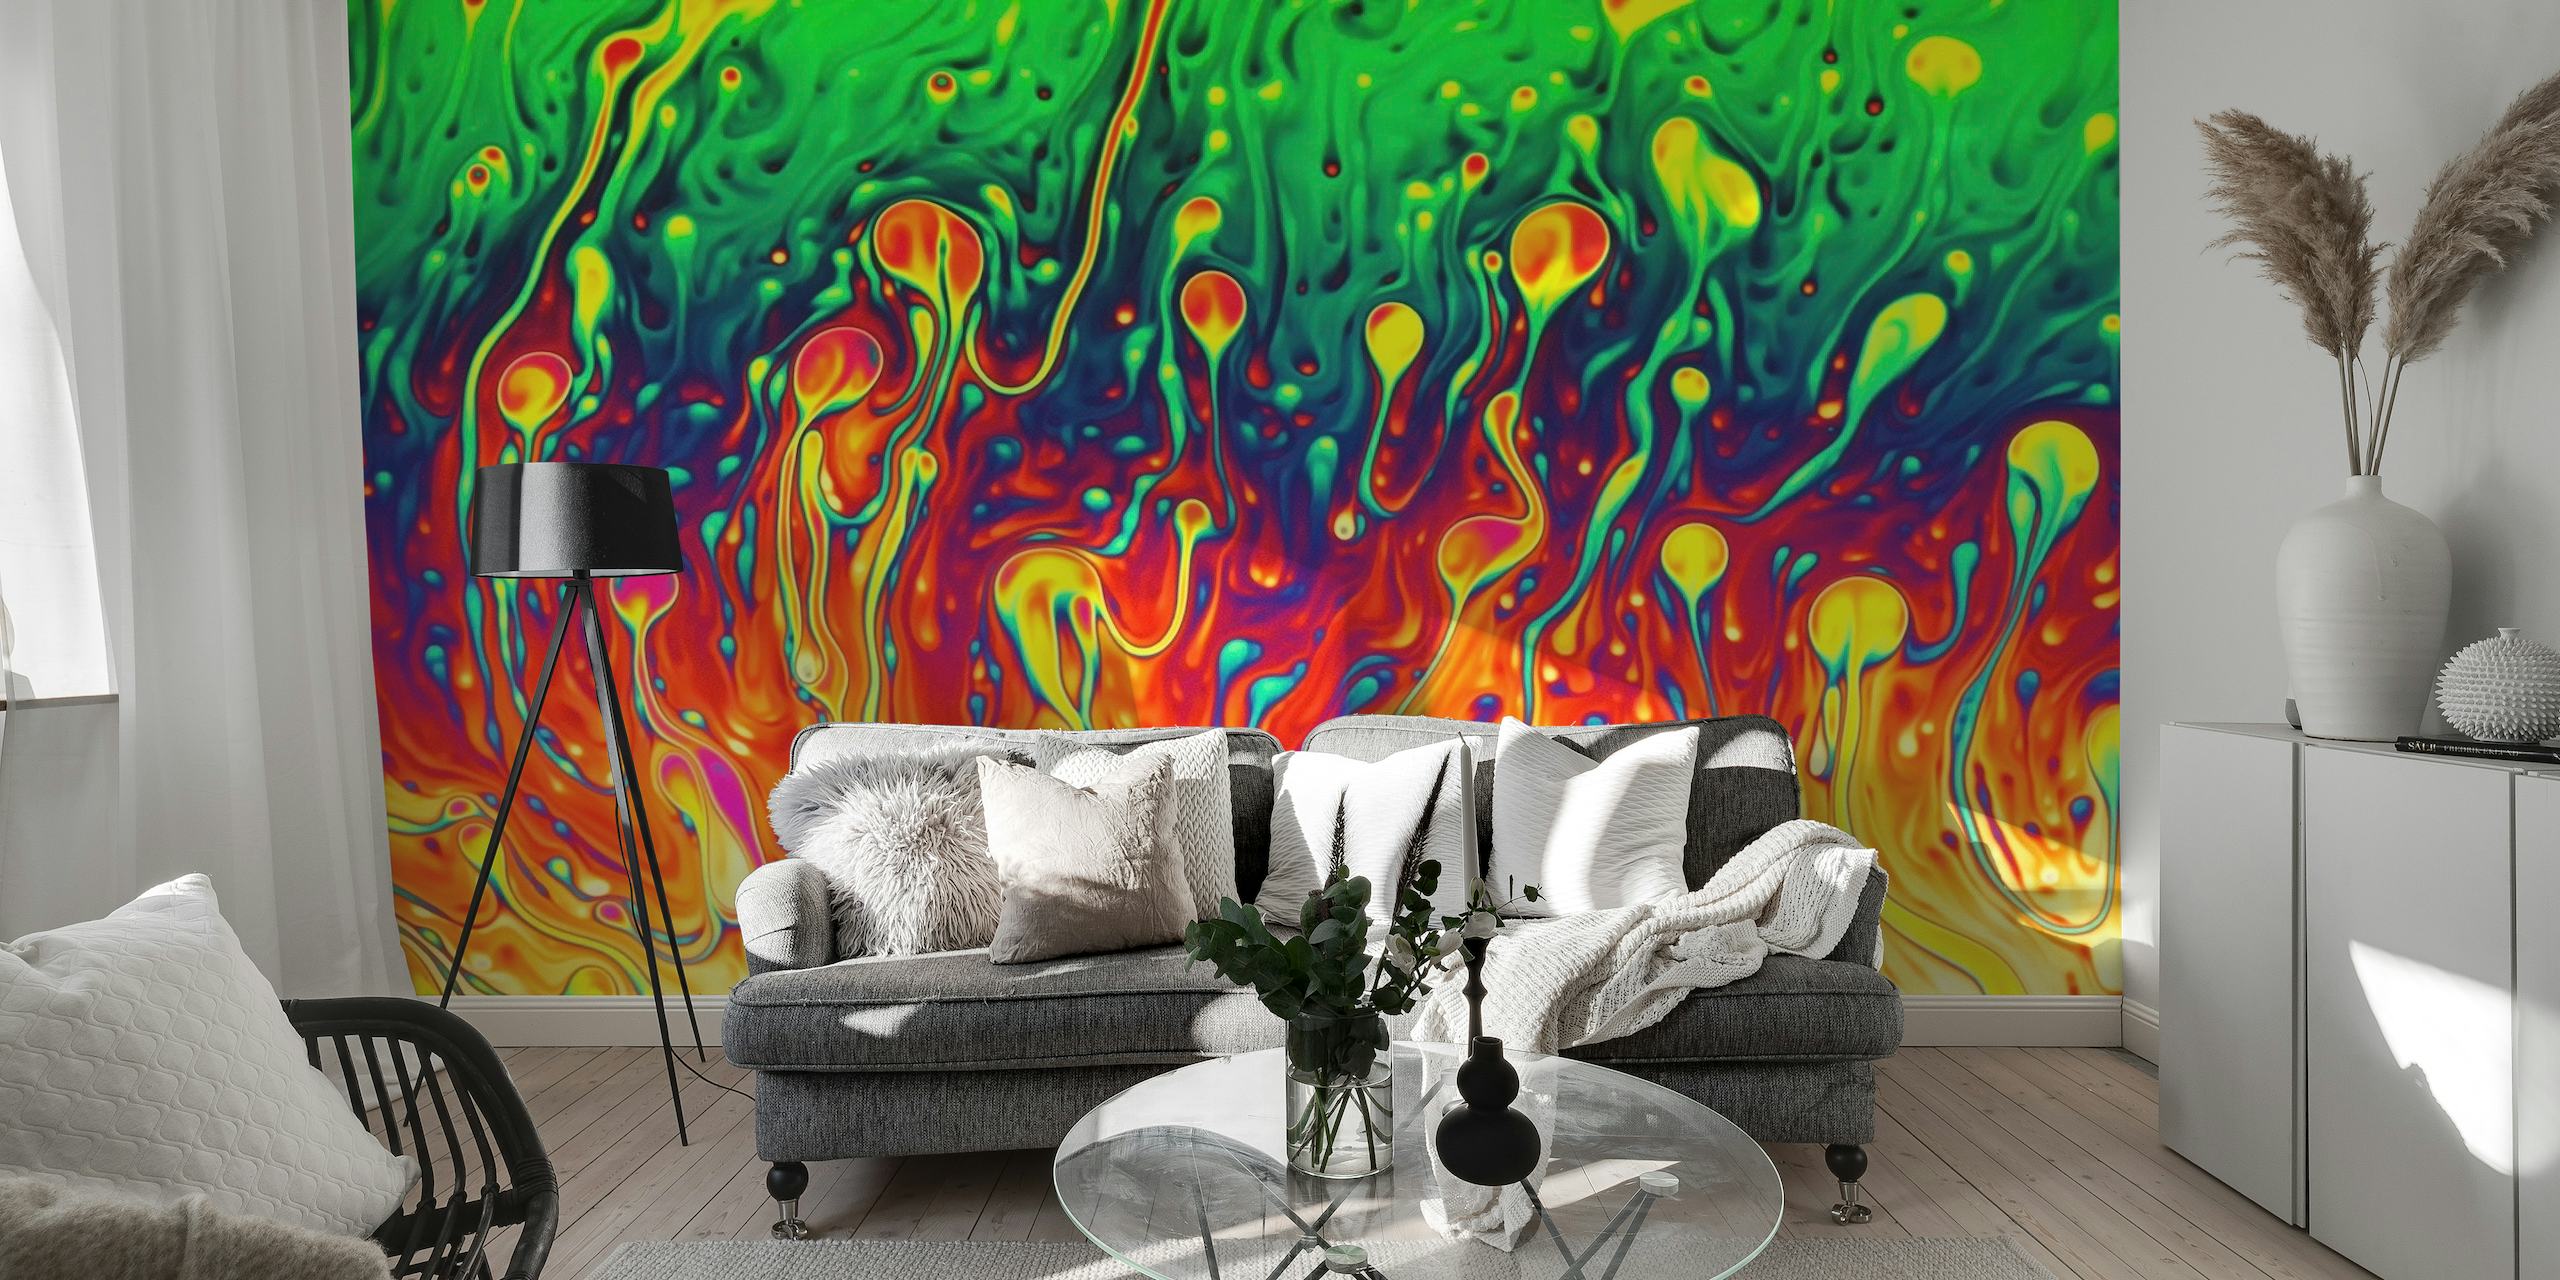 Abstract 'Soap Opera' wall mural with swirling greens, reds, and oranges